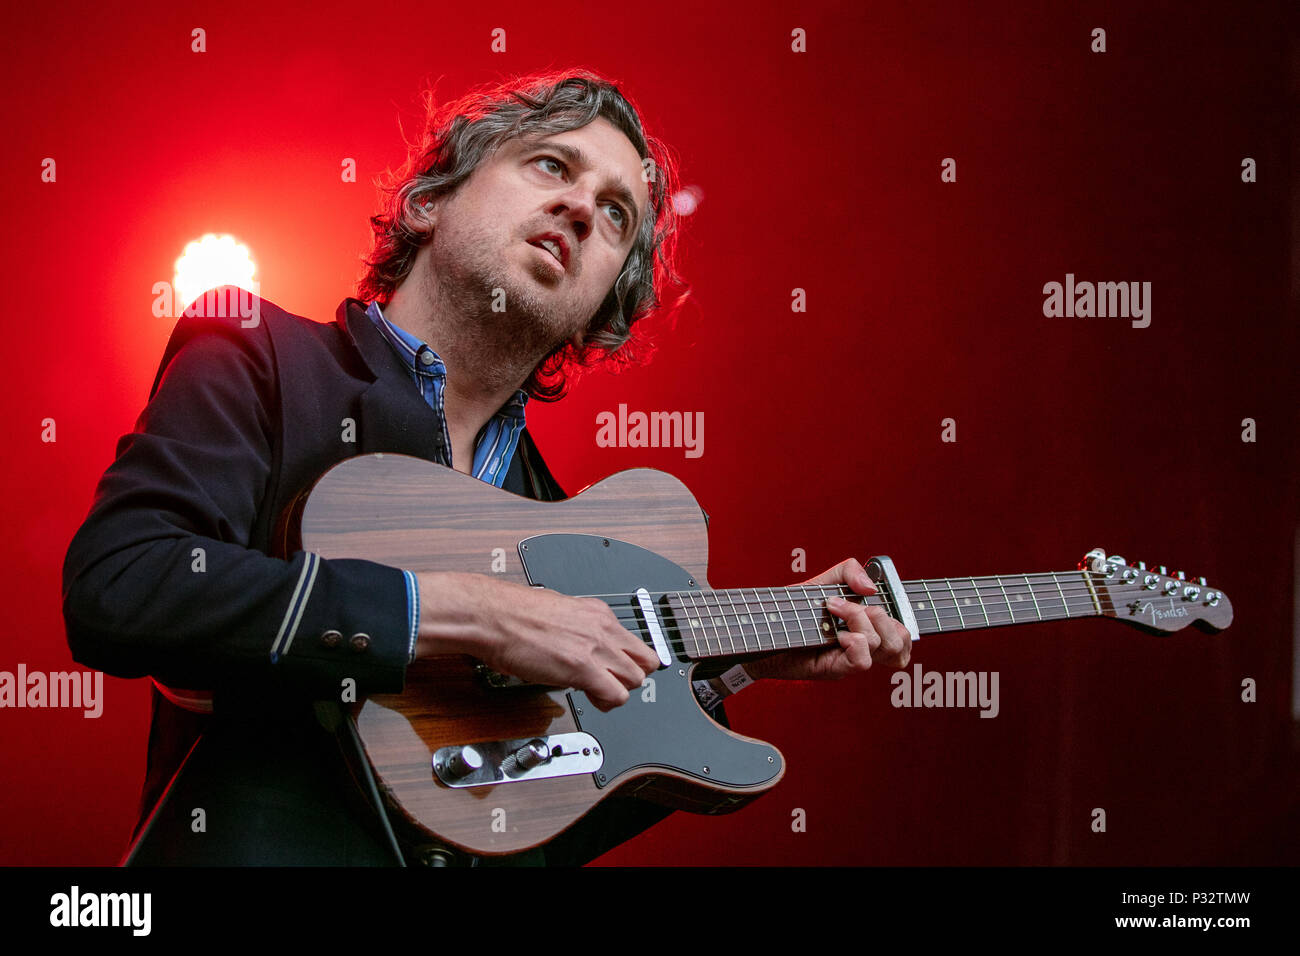 Norway, Oslo - June 16, 2018. The French indie pop band Phoenix performs a  live concert during the Norwegian music festival Piknik i Parken 2018 in  Oslo. Here guitarist Christian Mazzalai is